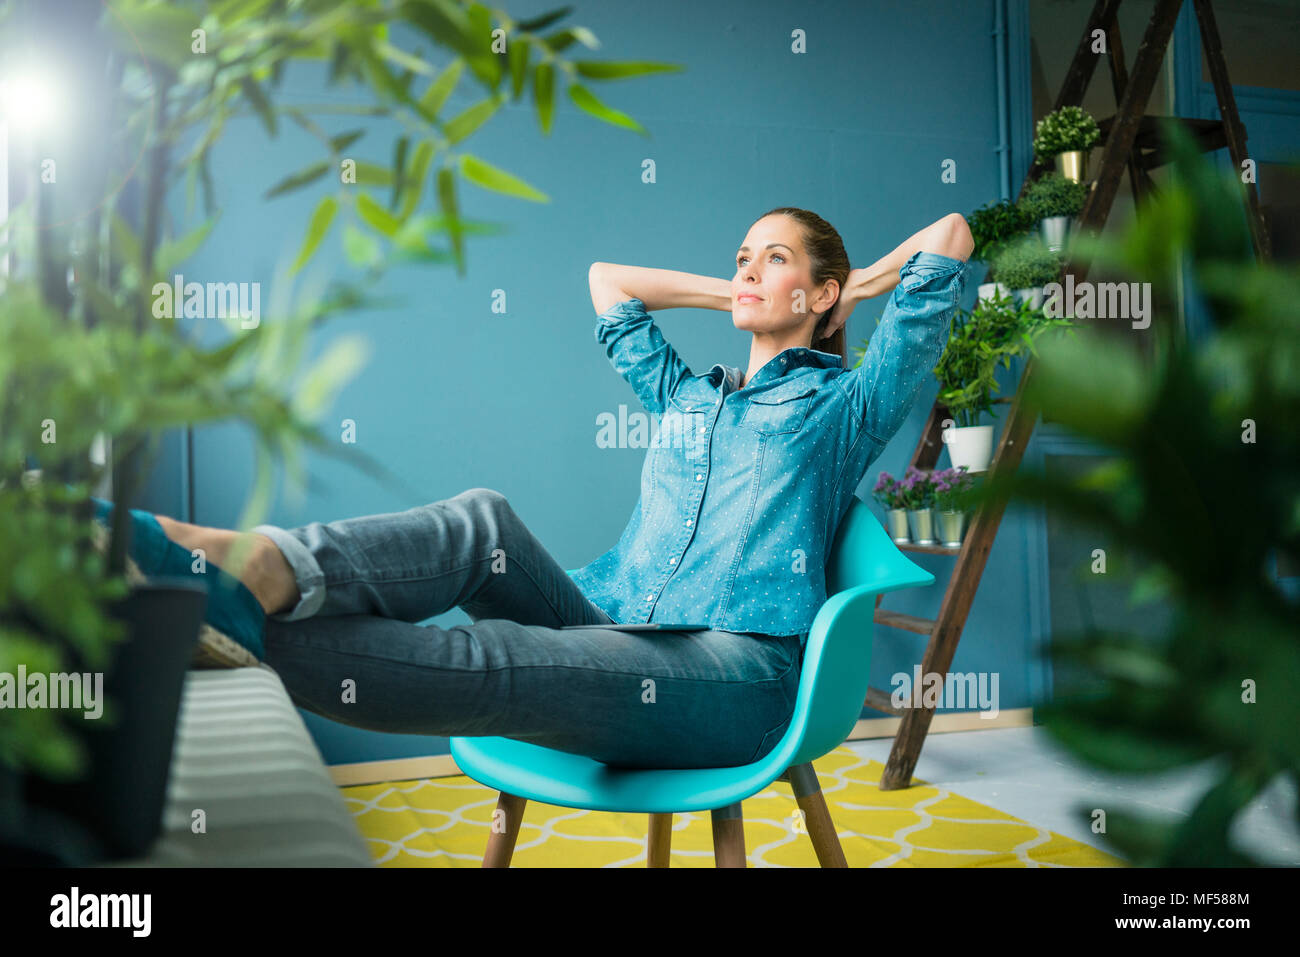 Beautiful woman sitting in her home, decorated with plants, daydreaming Stock Photo